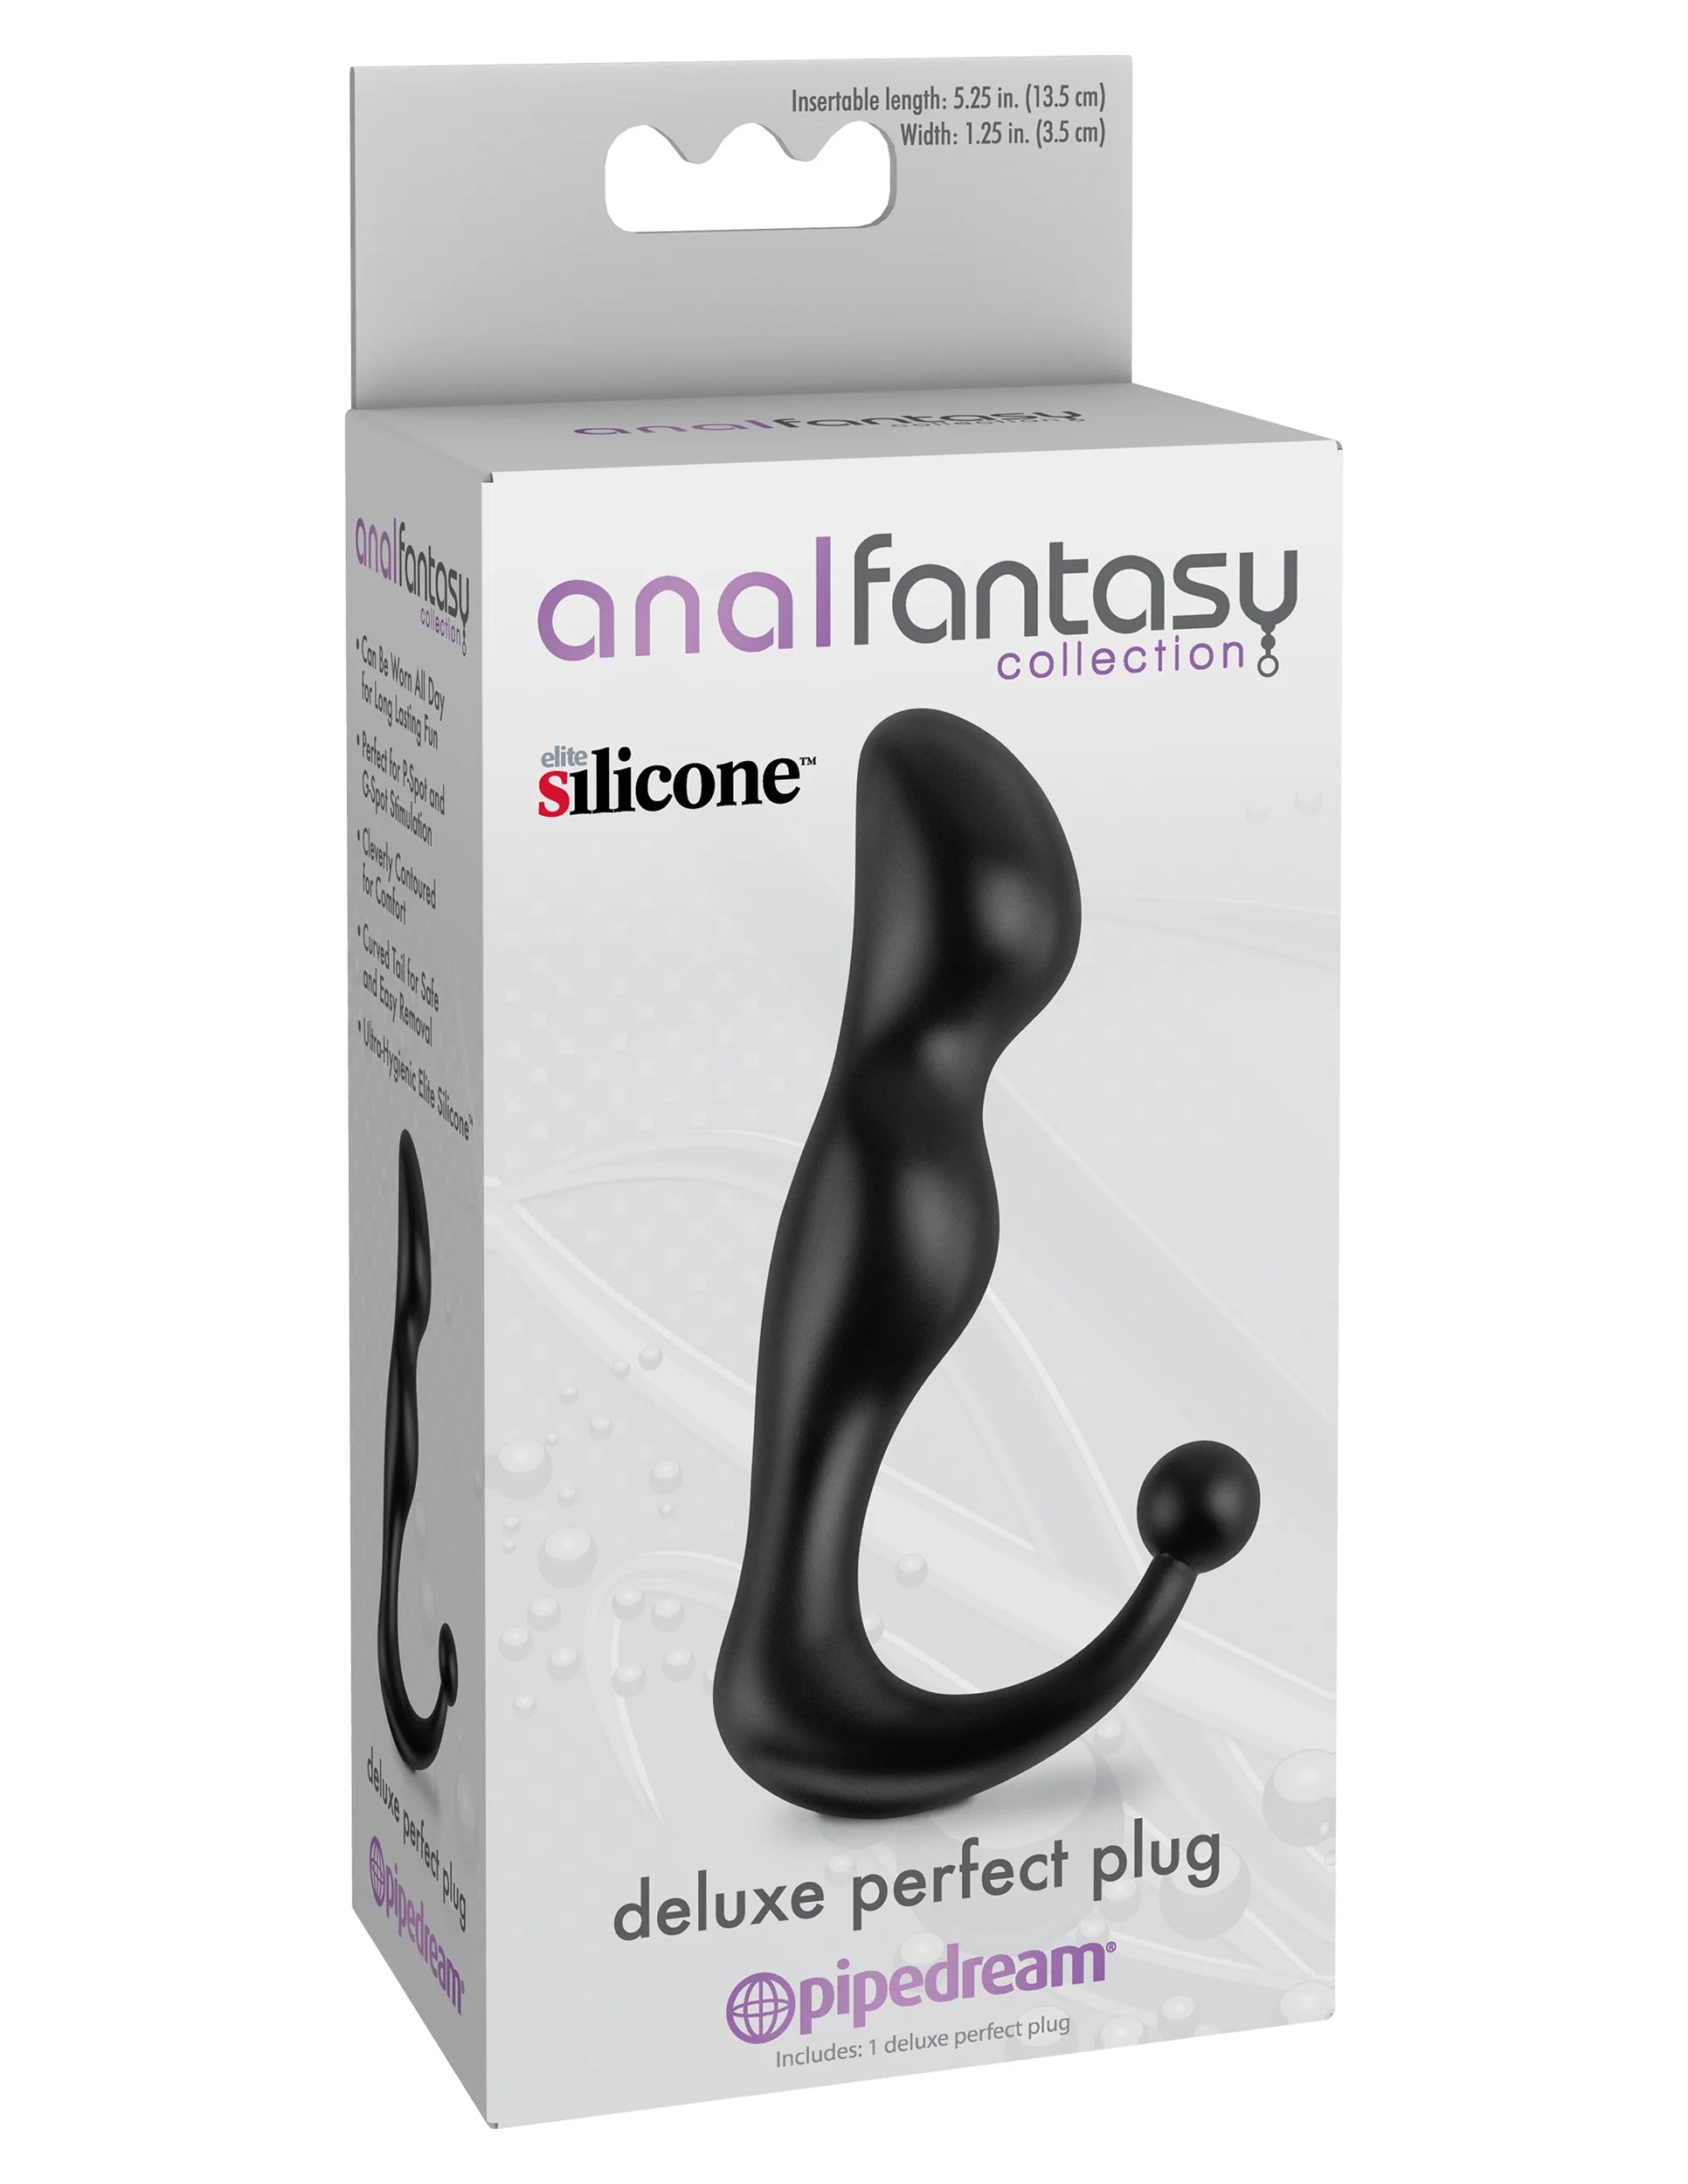 Pipedream Anal Fantasy Collection Silicone Deluxe Perfect Plug